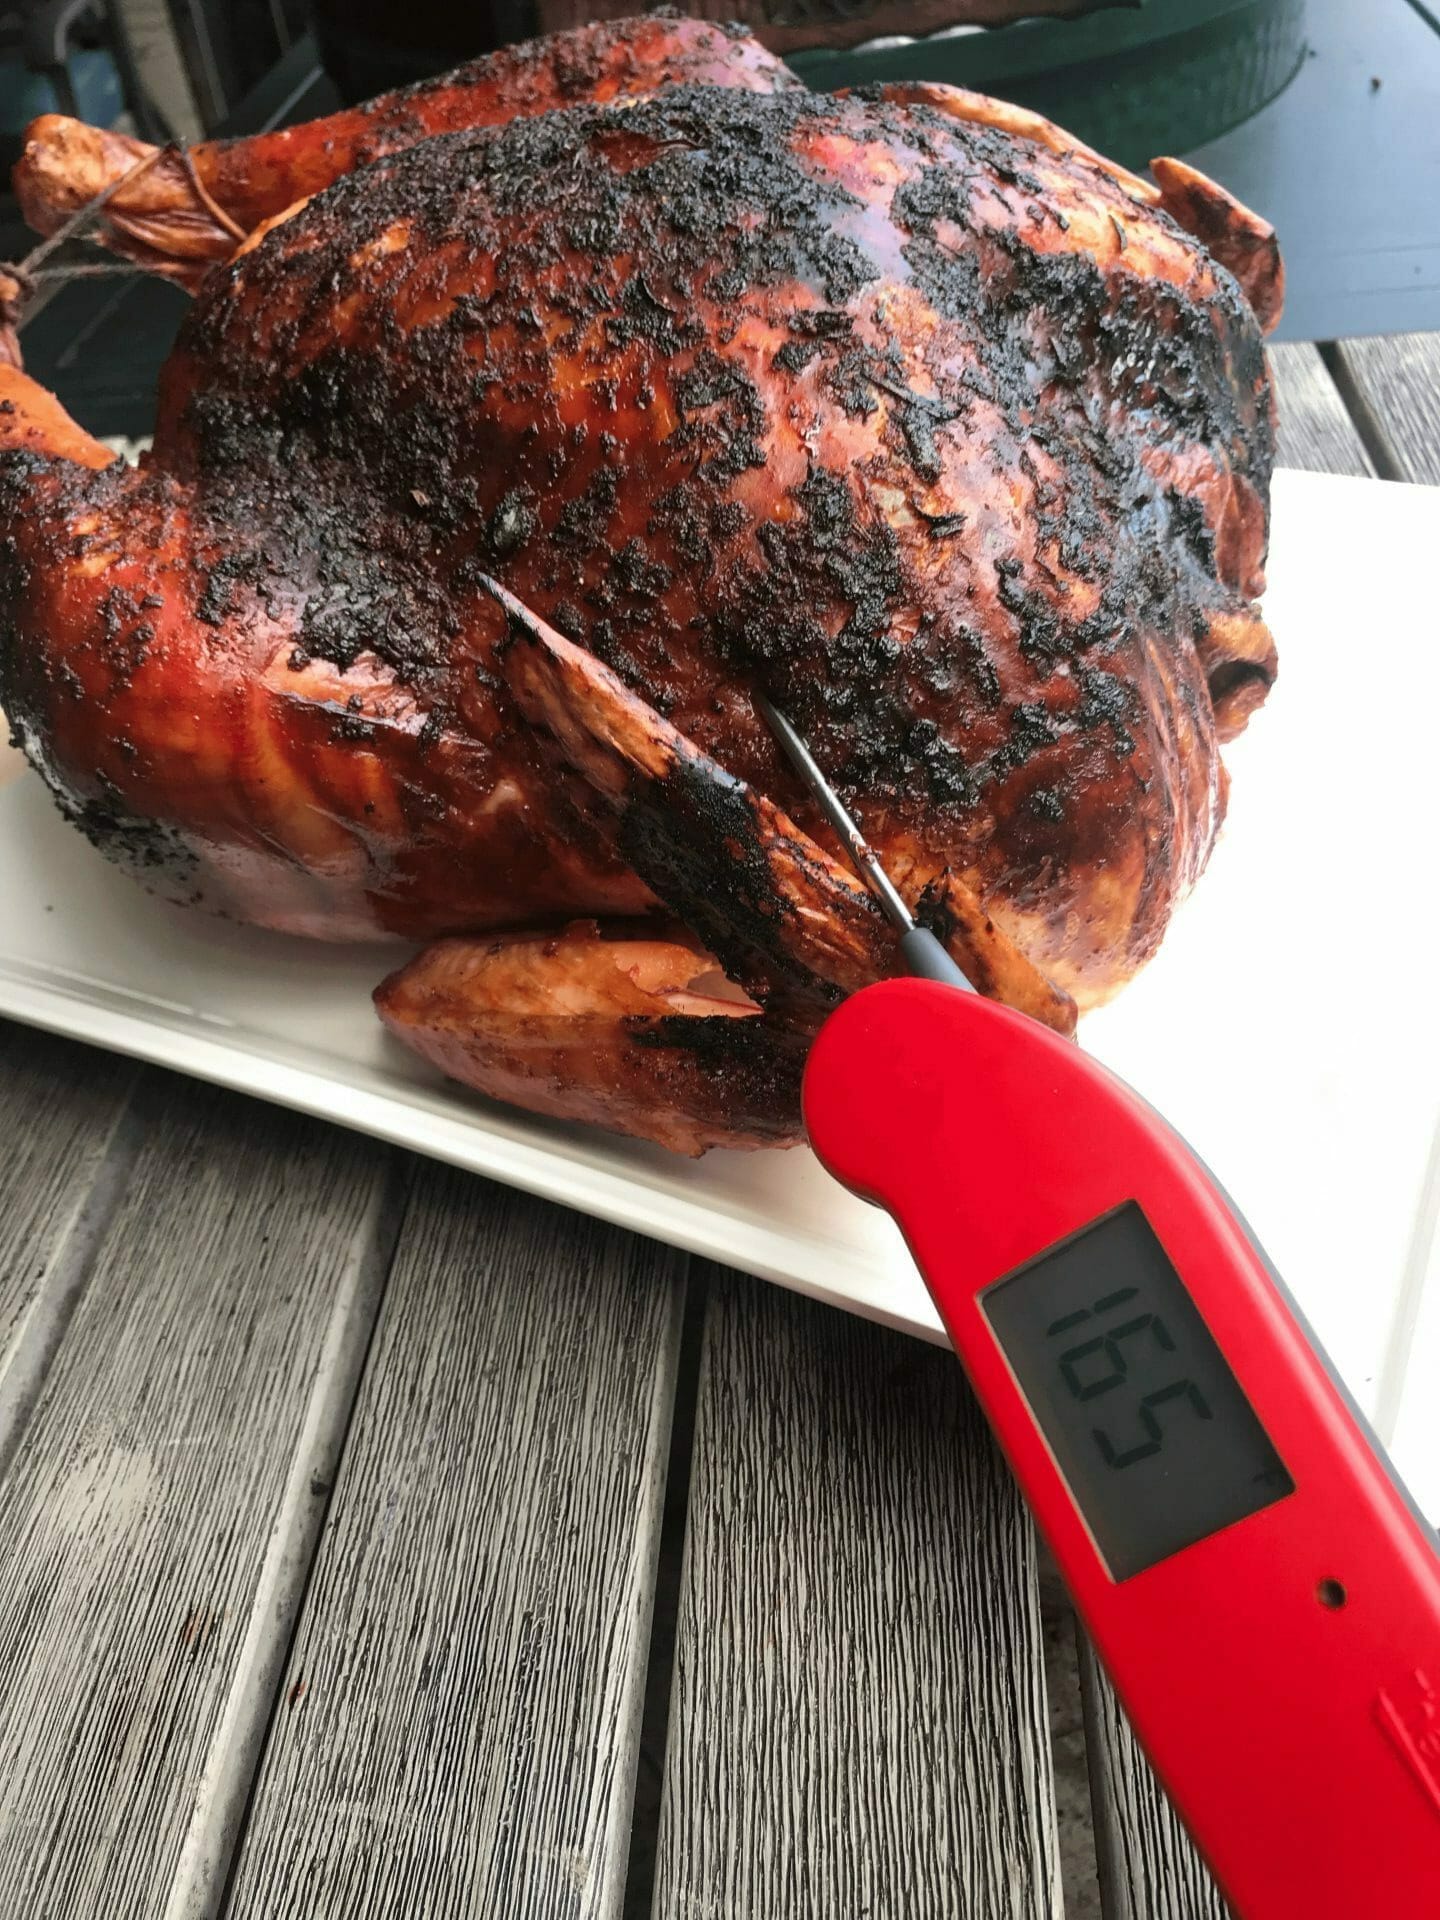 thermapen one review